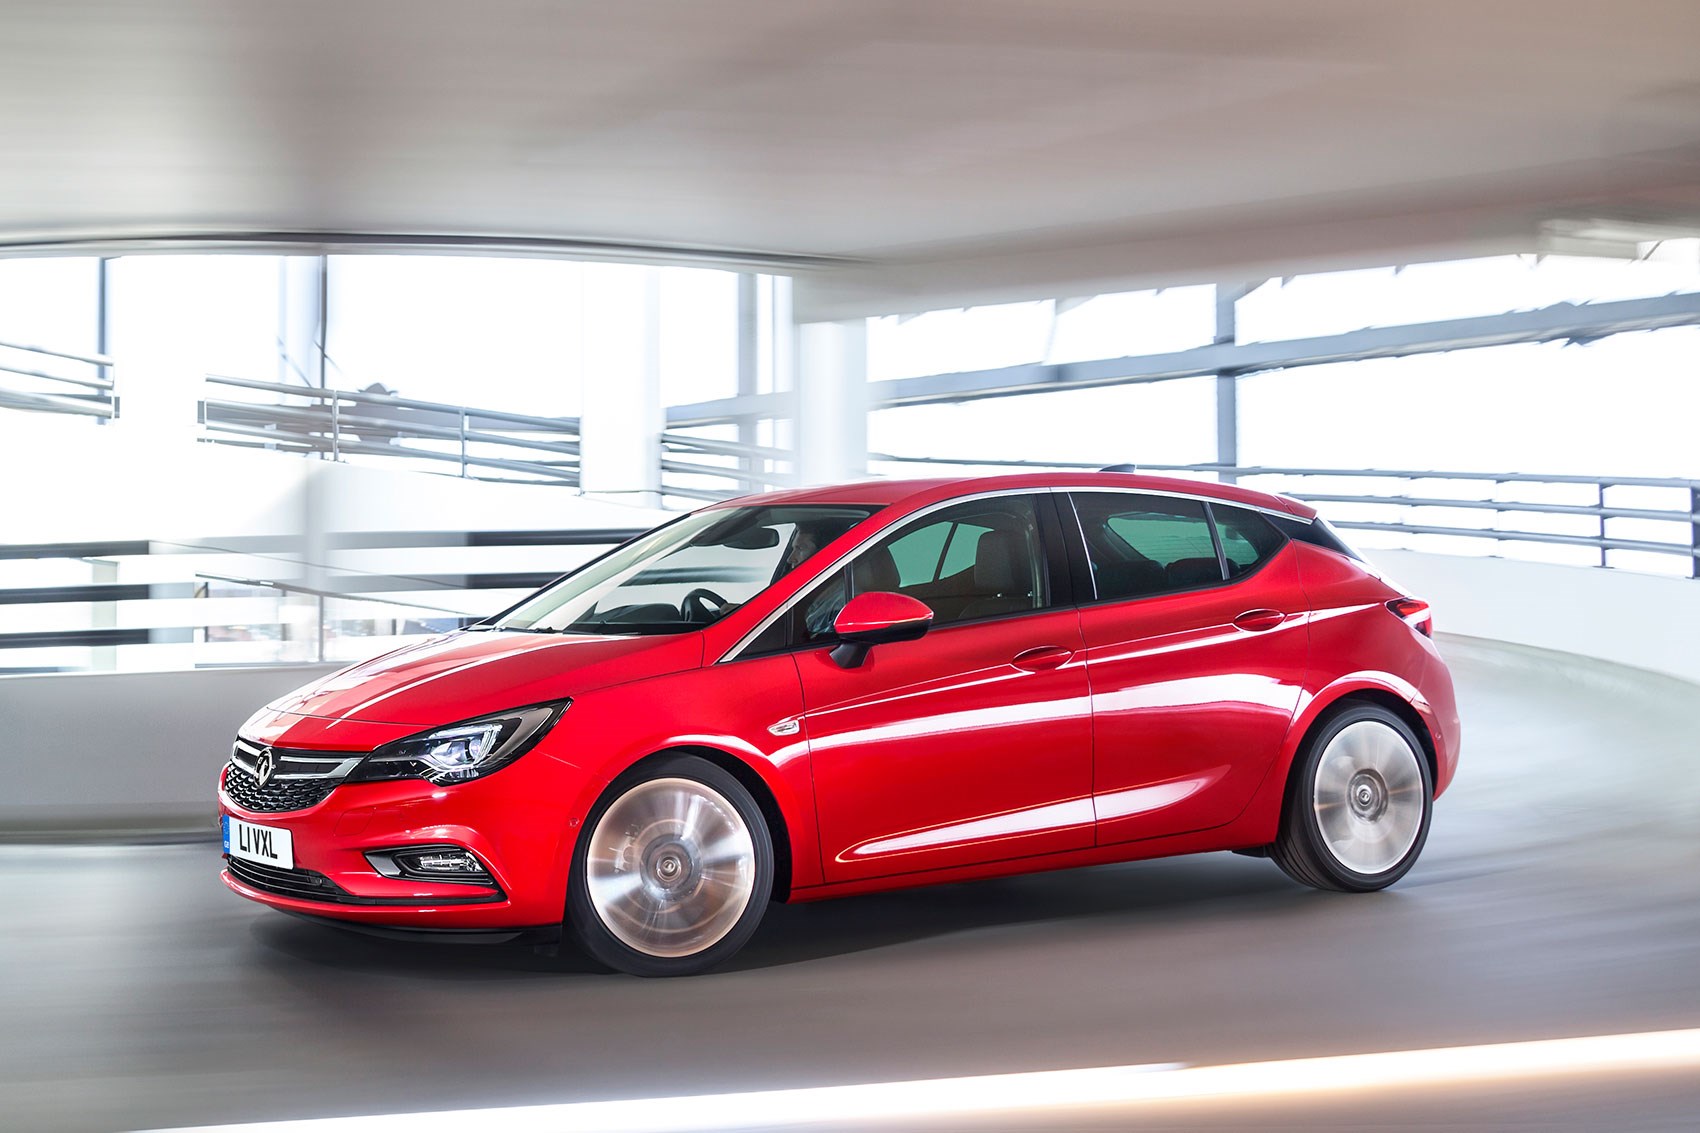 Vauxhall Astra in pictures: new 2015 model revealed | CAR Magazine